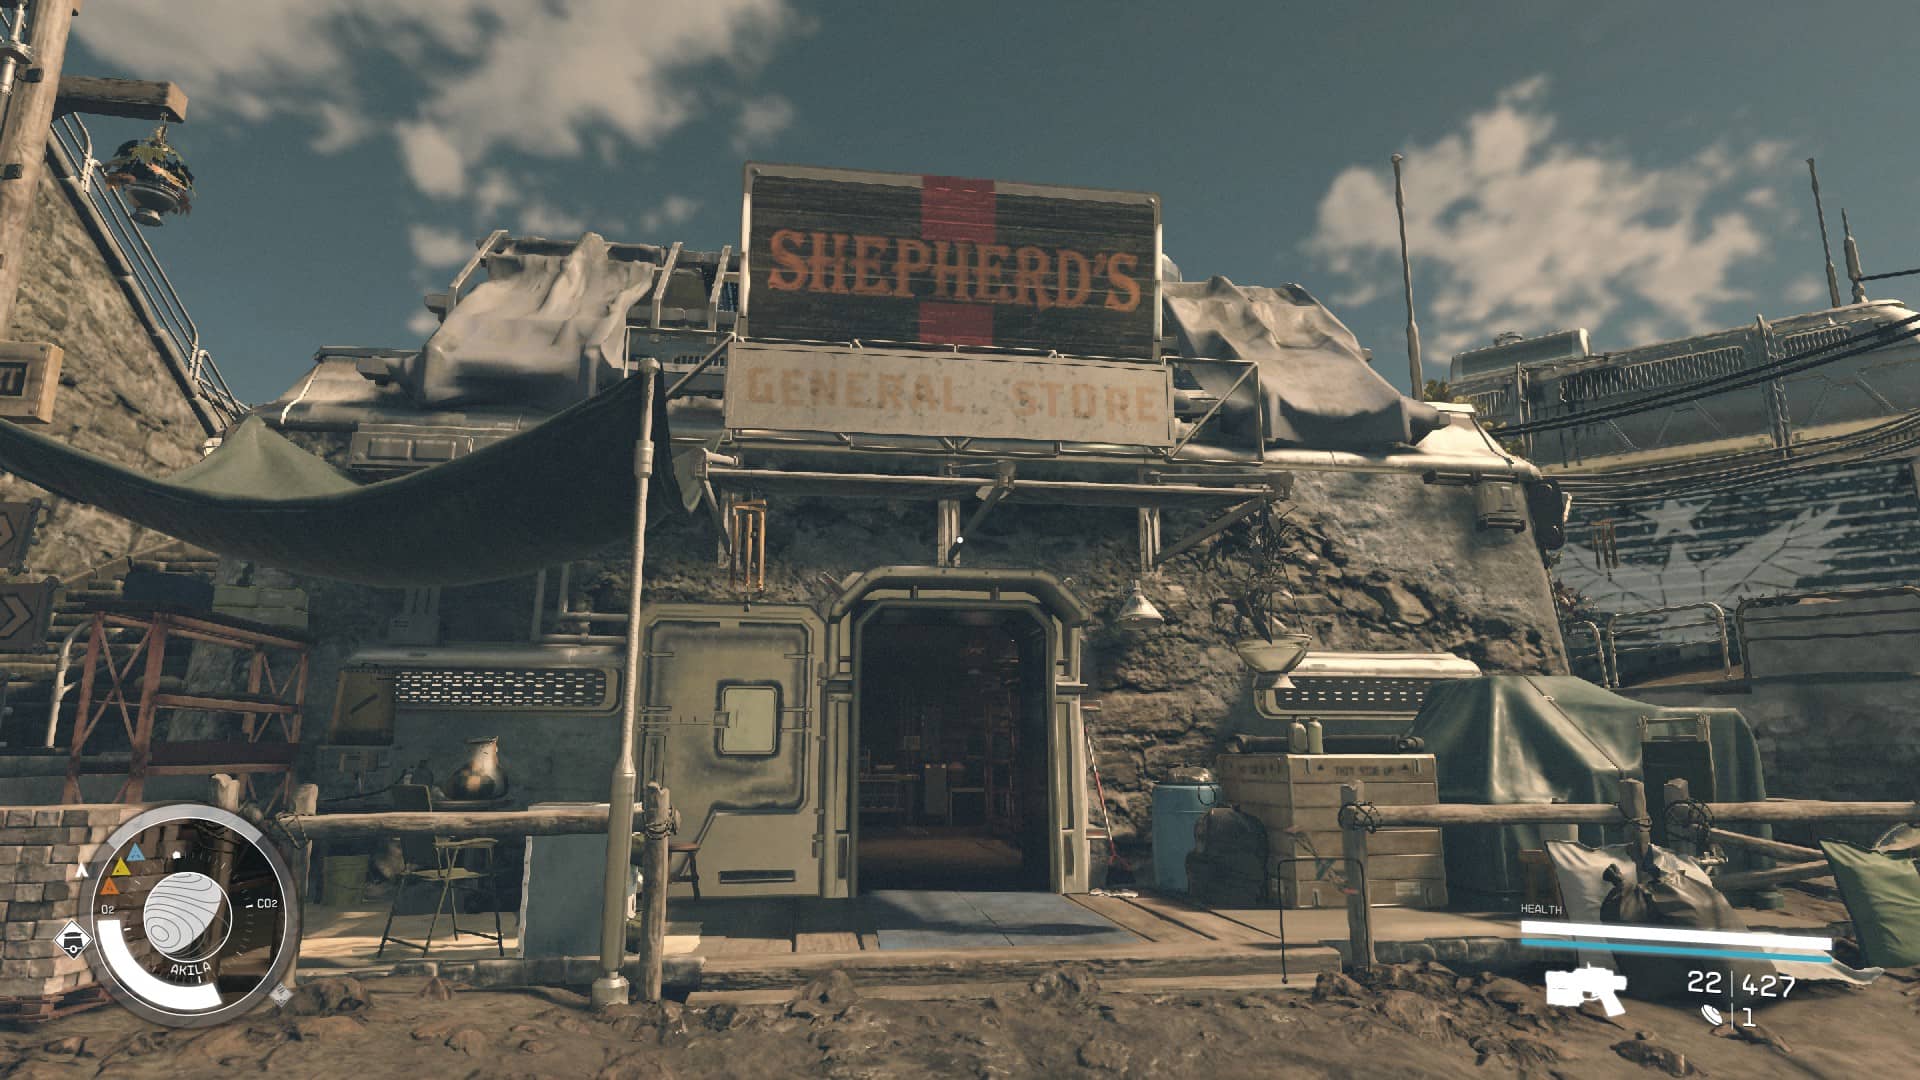 Starfield Akila City shops: The front of Shepherd's General Store in Akila City.